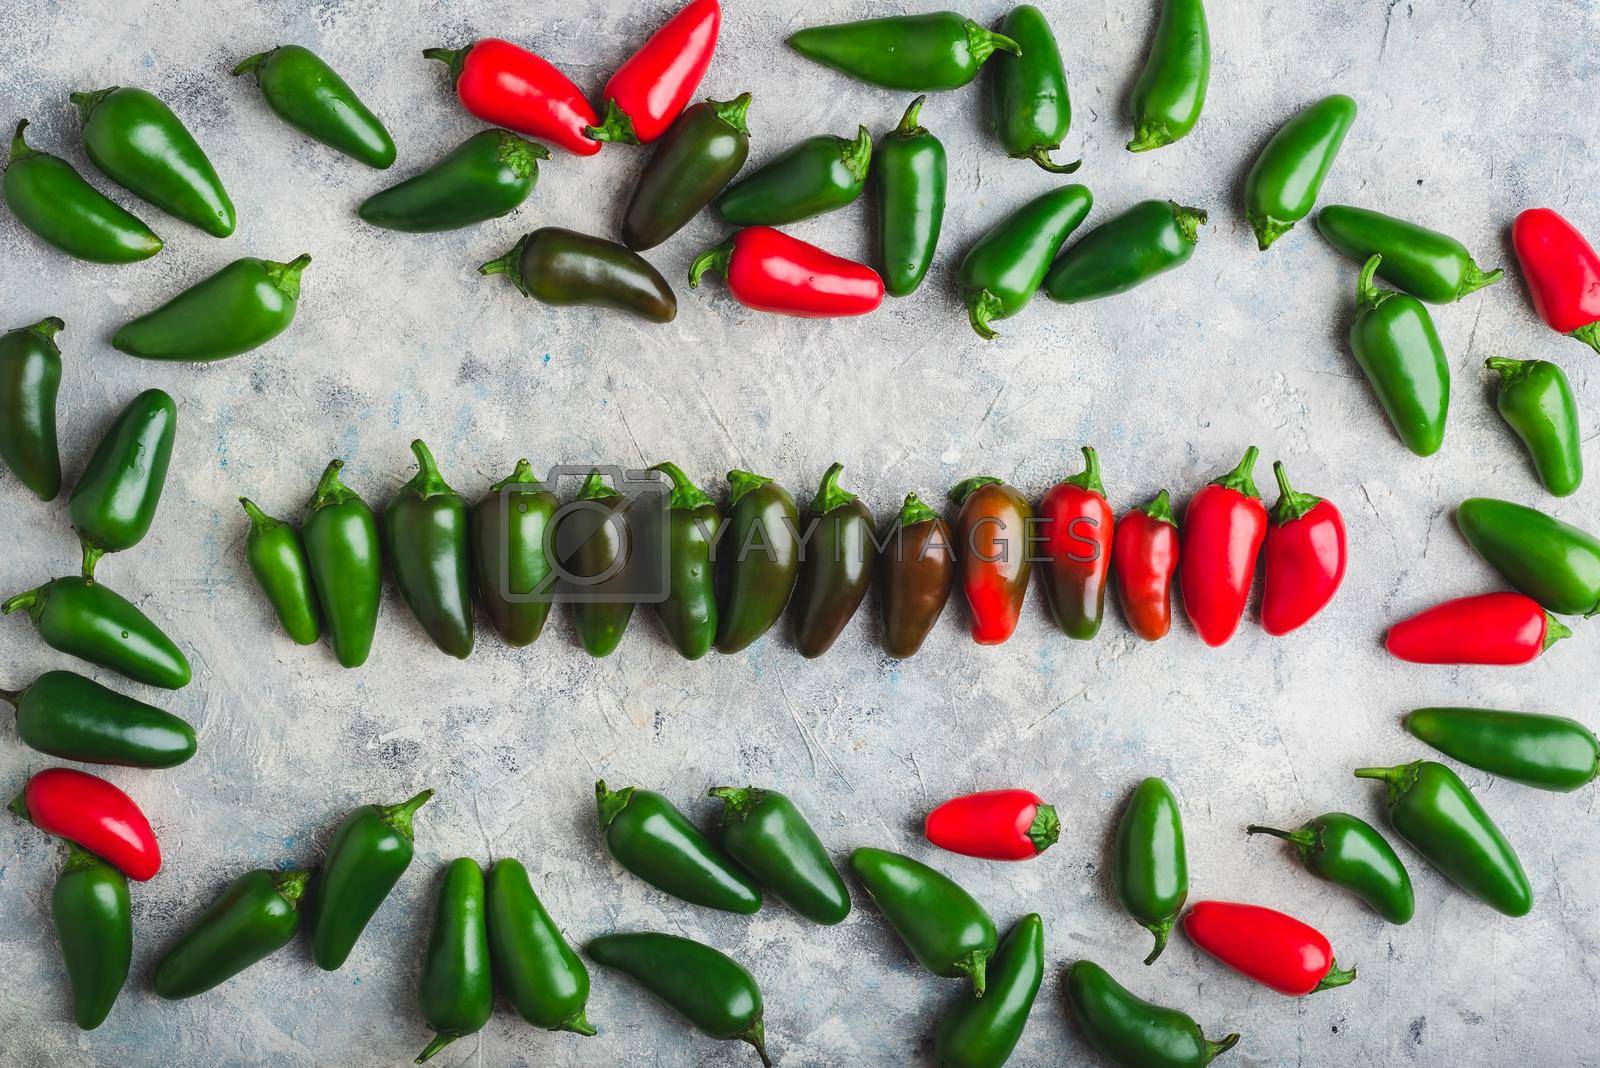 Royalty free image of Gradient of Jalapeno Chili Peppers on Light Background by Seva_blsv